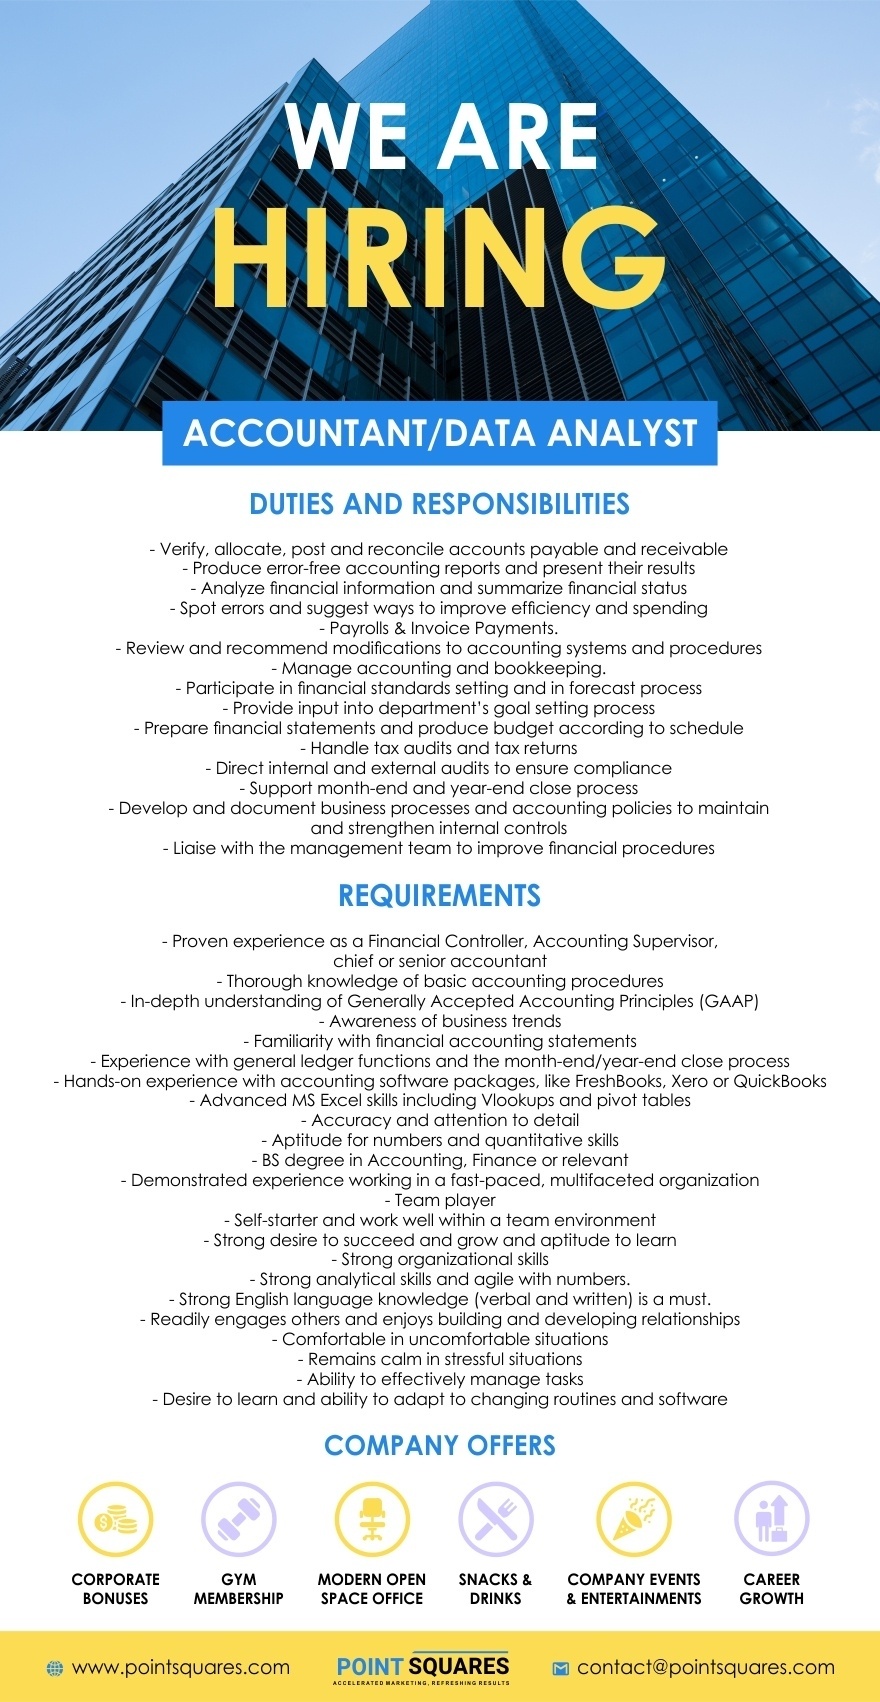 POINTSQUARES OÜ ACCOUNTANT/DATA ANALYST